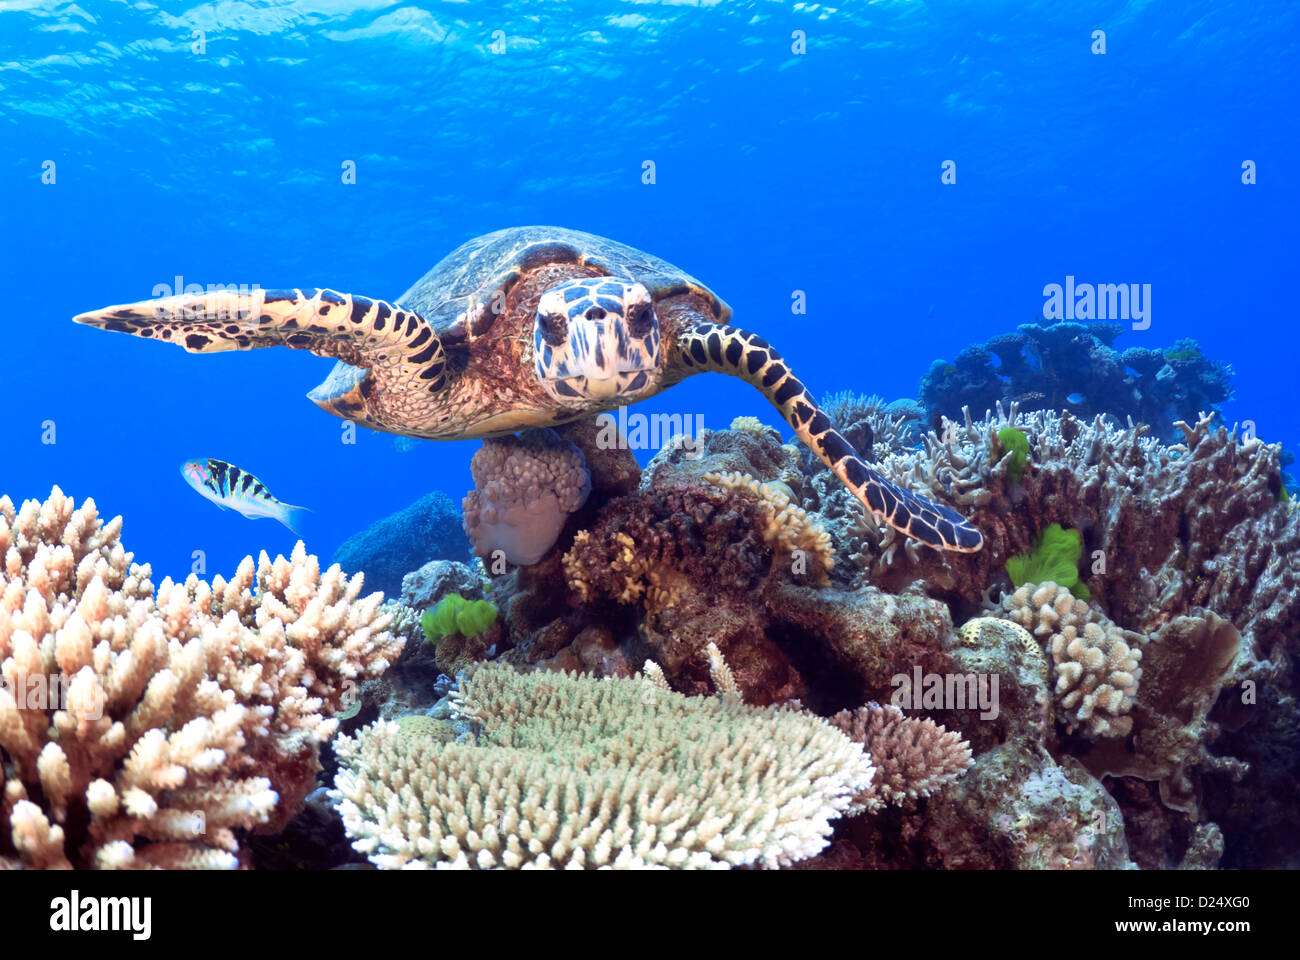 Hawksbill Sea Turtle (Eretmochelys imbricata) swimming over a Coral Reef, Great Barrier Reef, Coral Sea, Queensland, Australia Stock Photo